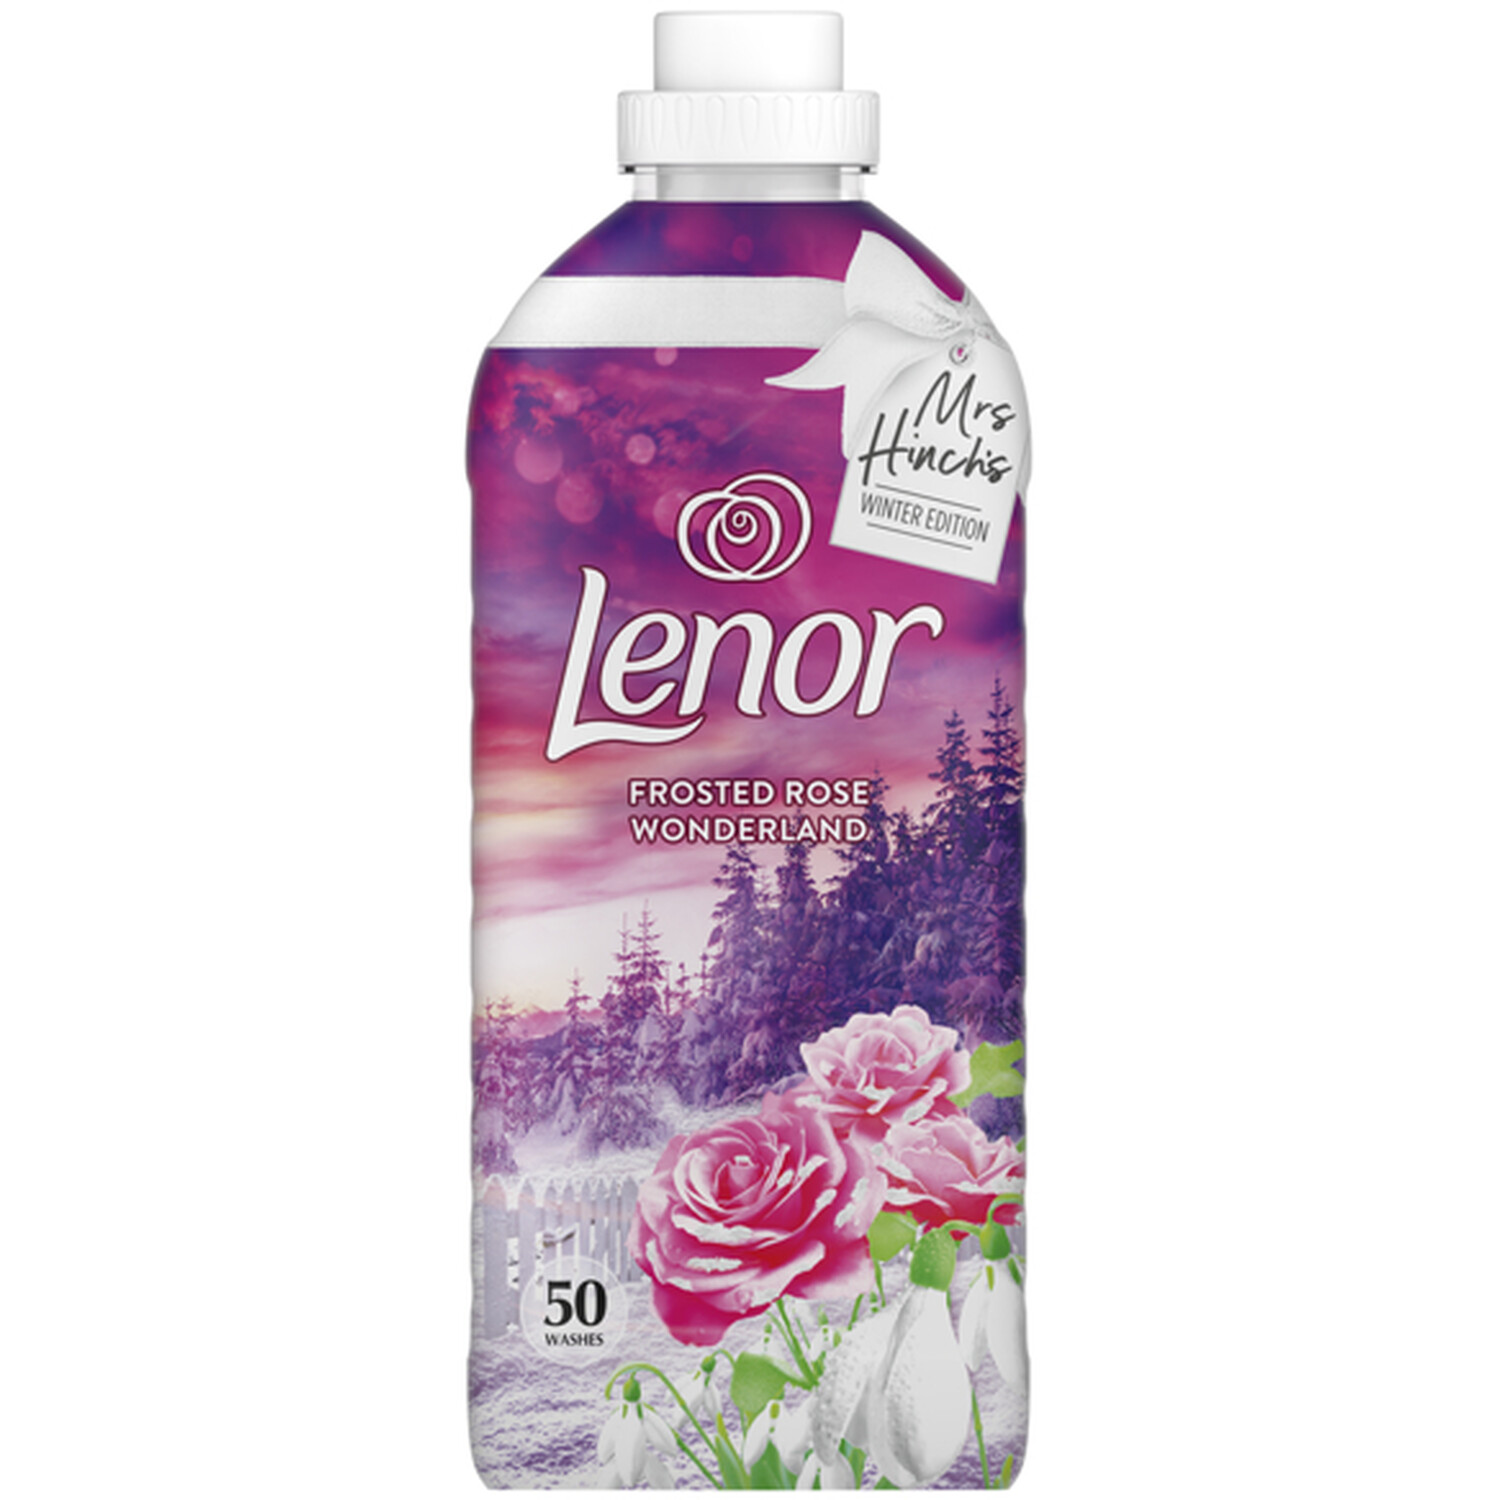 Lenor Frosted Rose Wonderland Fabric Conditioner 50 Washes 1.65L Image